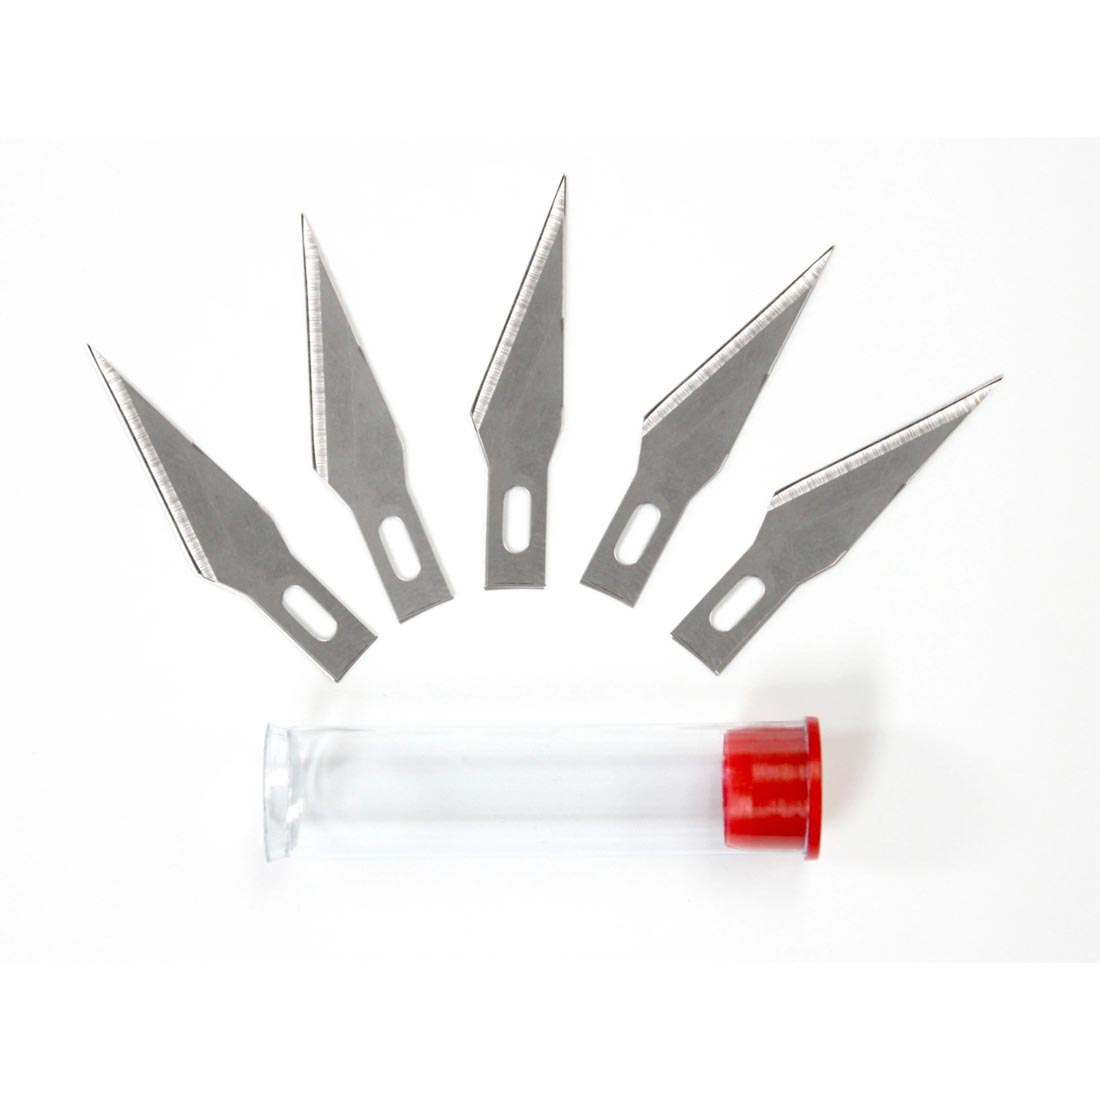 Five Excel #11 Knife Blade Refills with their tube package